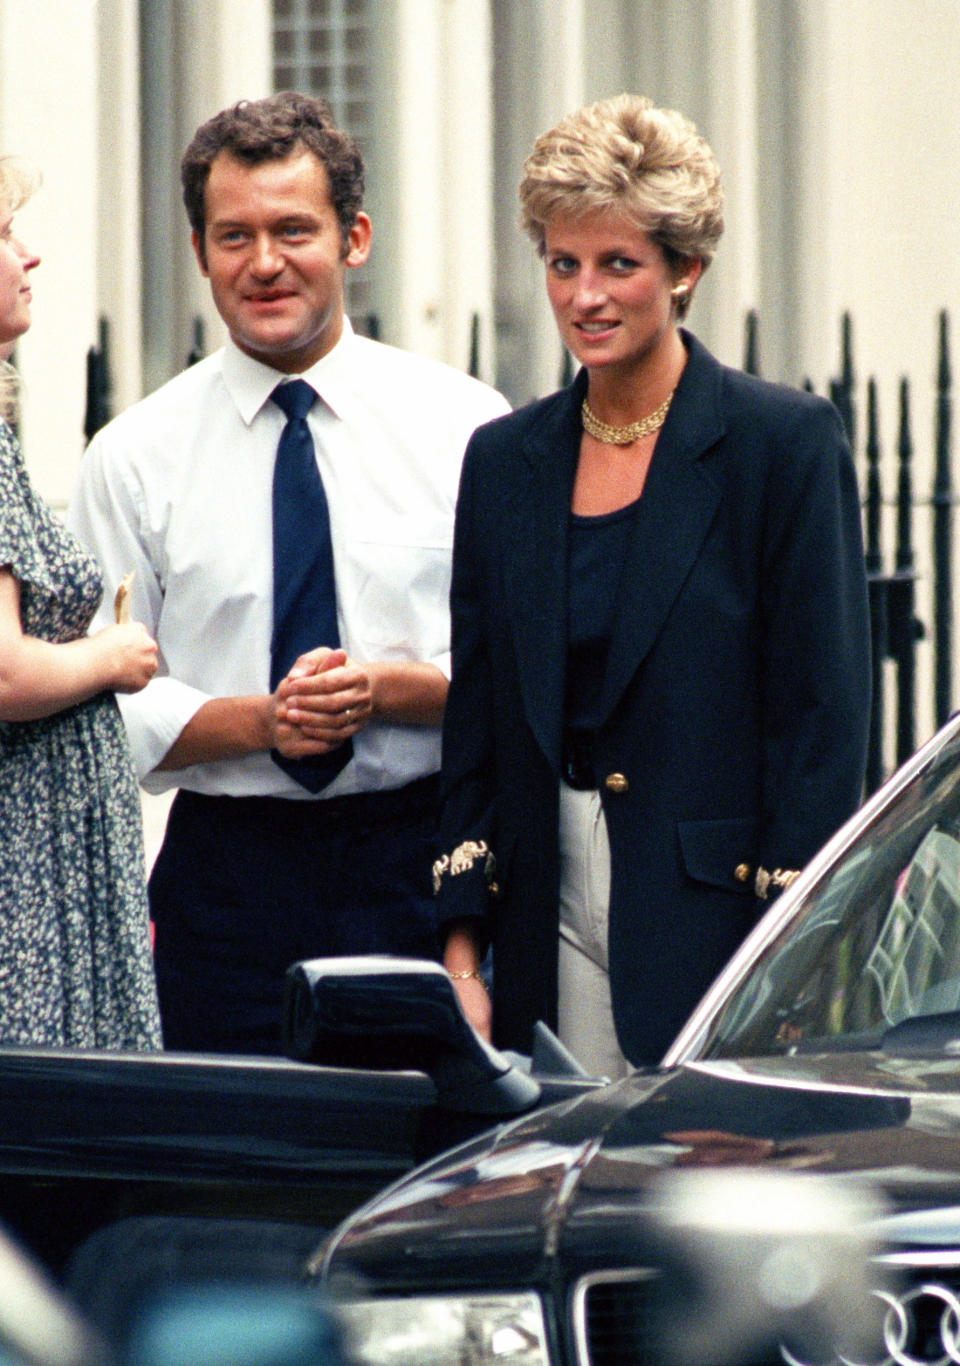 Paul Burrell had a close relationship to Diana before her death in 1997. Source: Getty